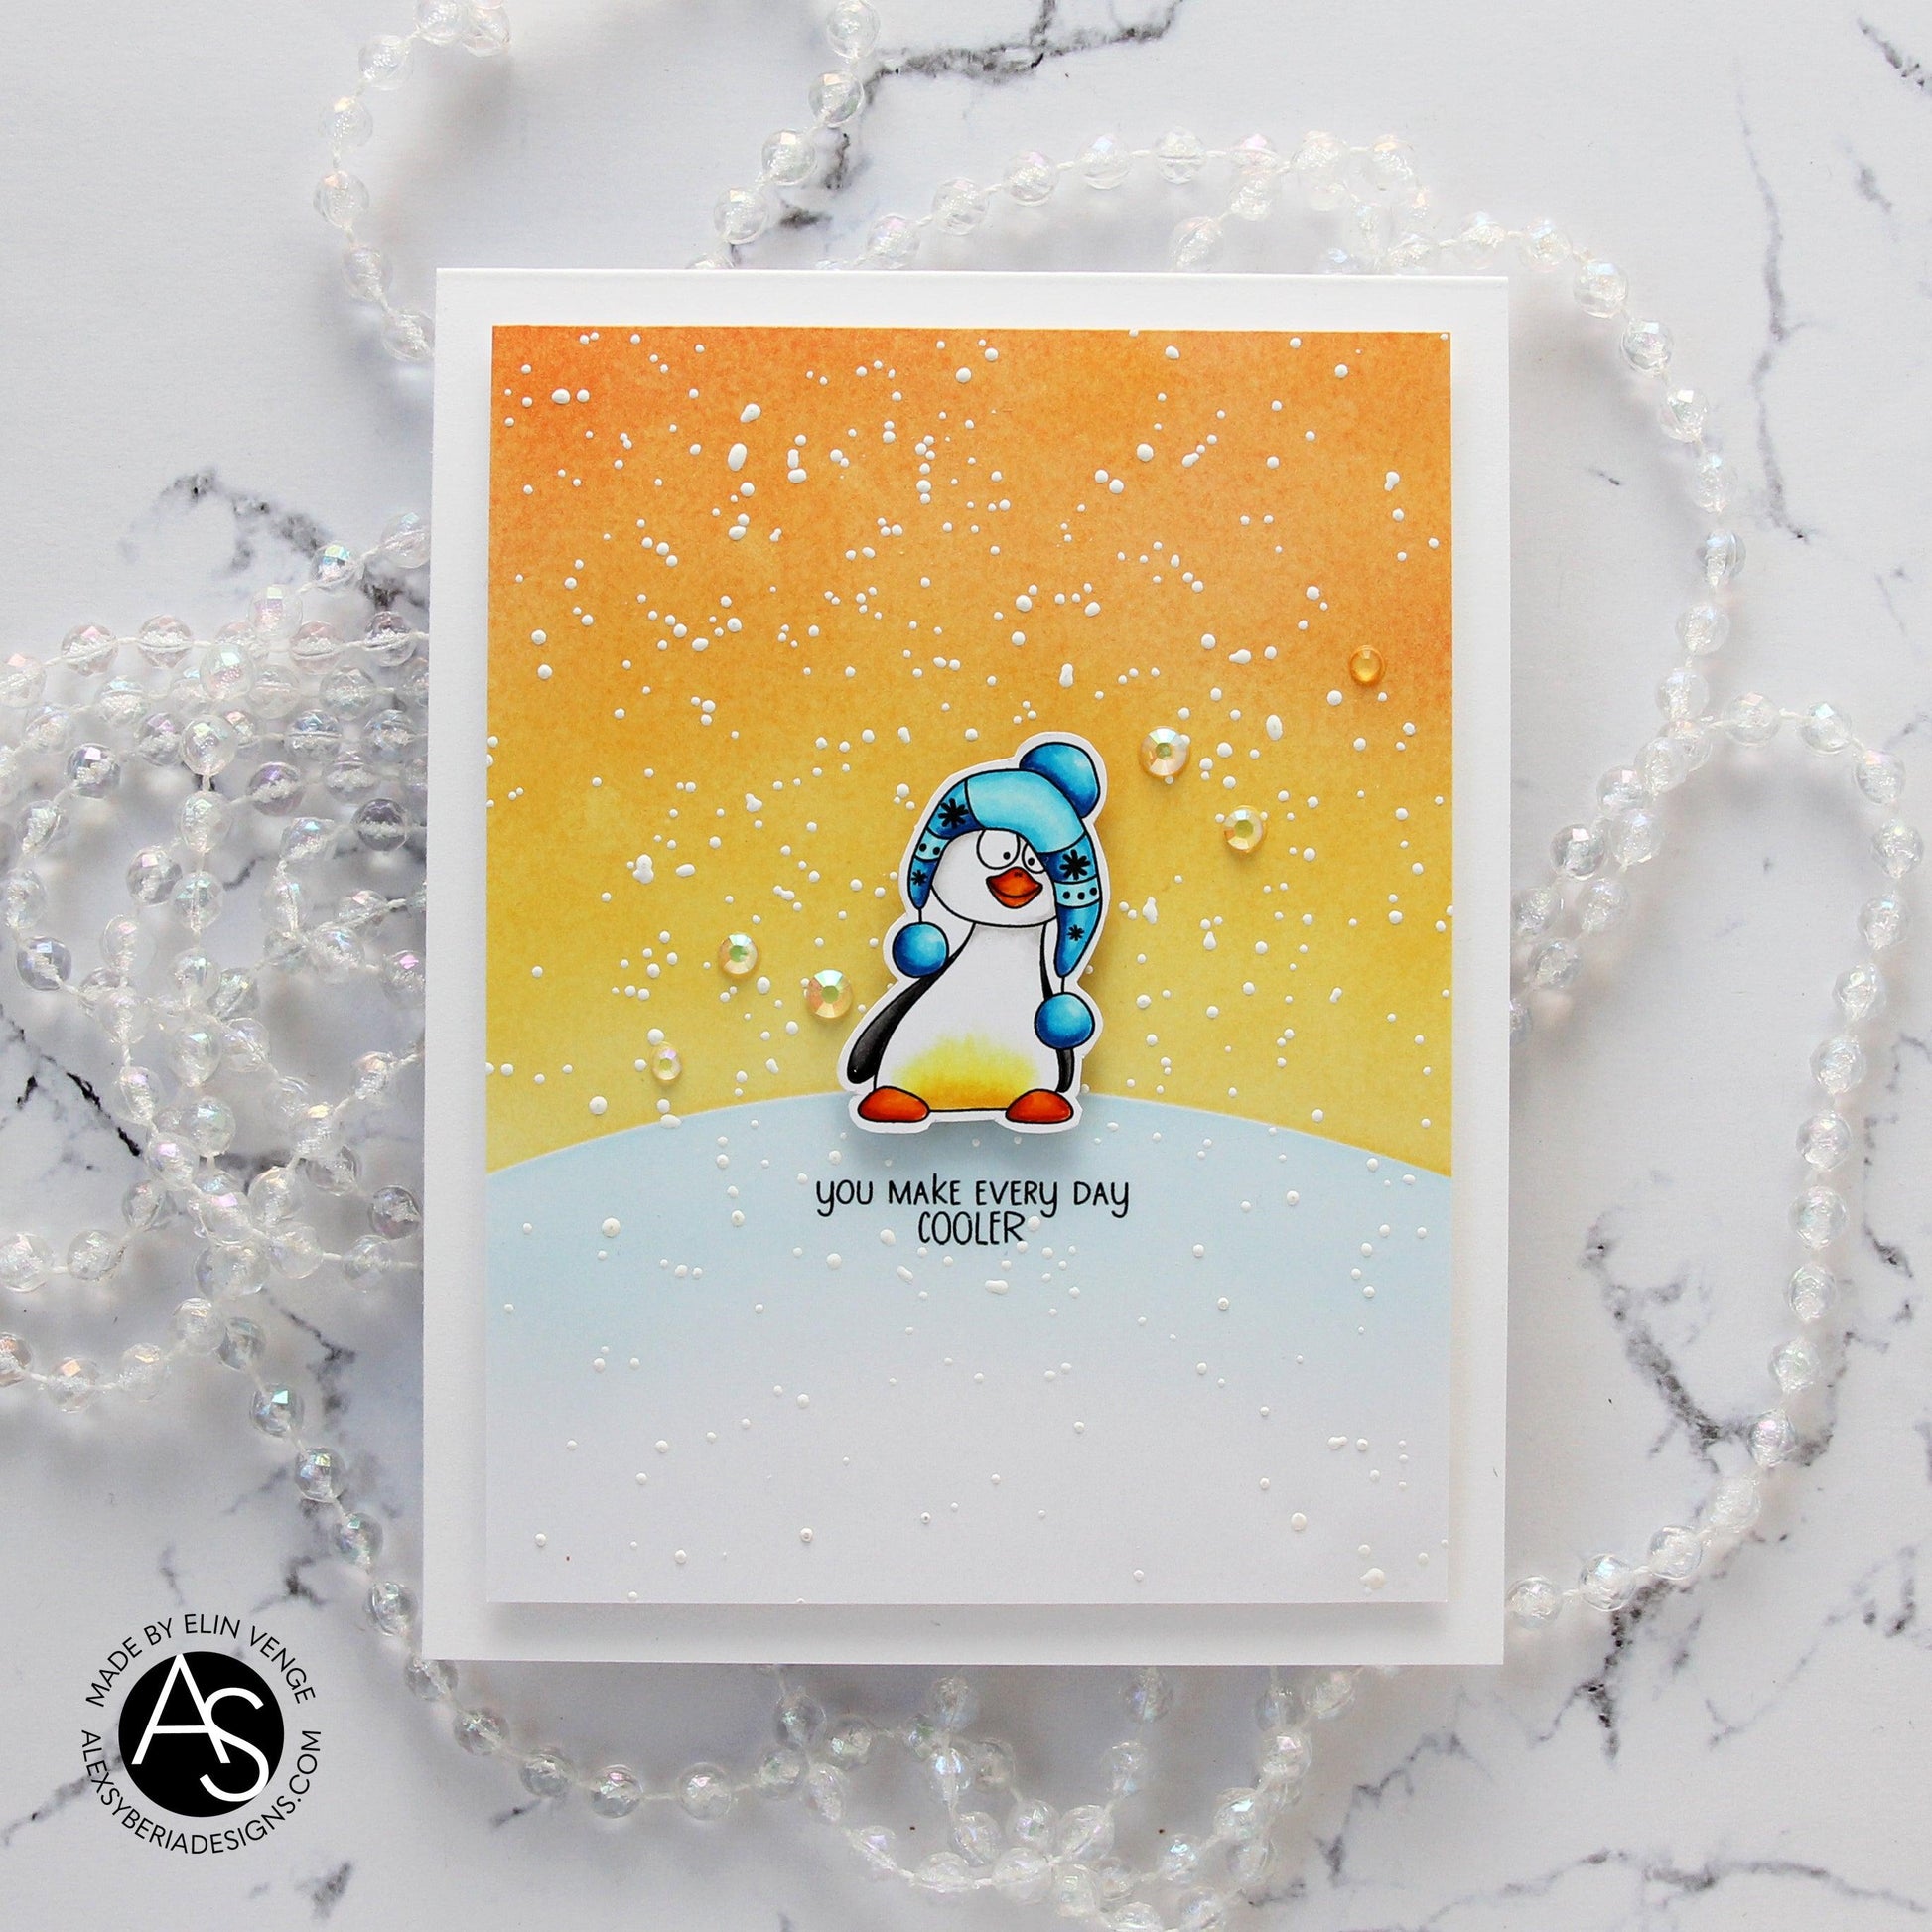 smile-and-wave-stamp-set-alex-syberia-designs-penguins-winter-christmas-stamps-sentiments-funny-snowboarding-stamp-clean-and-simple-cards